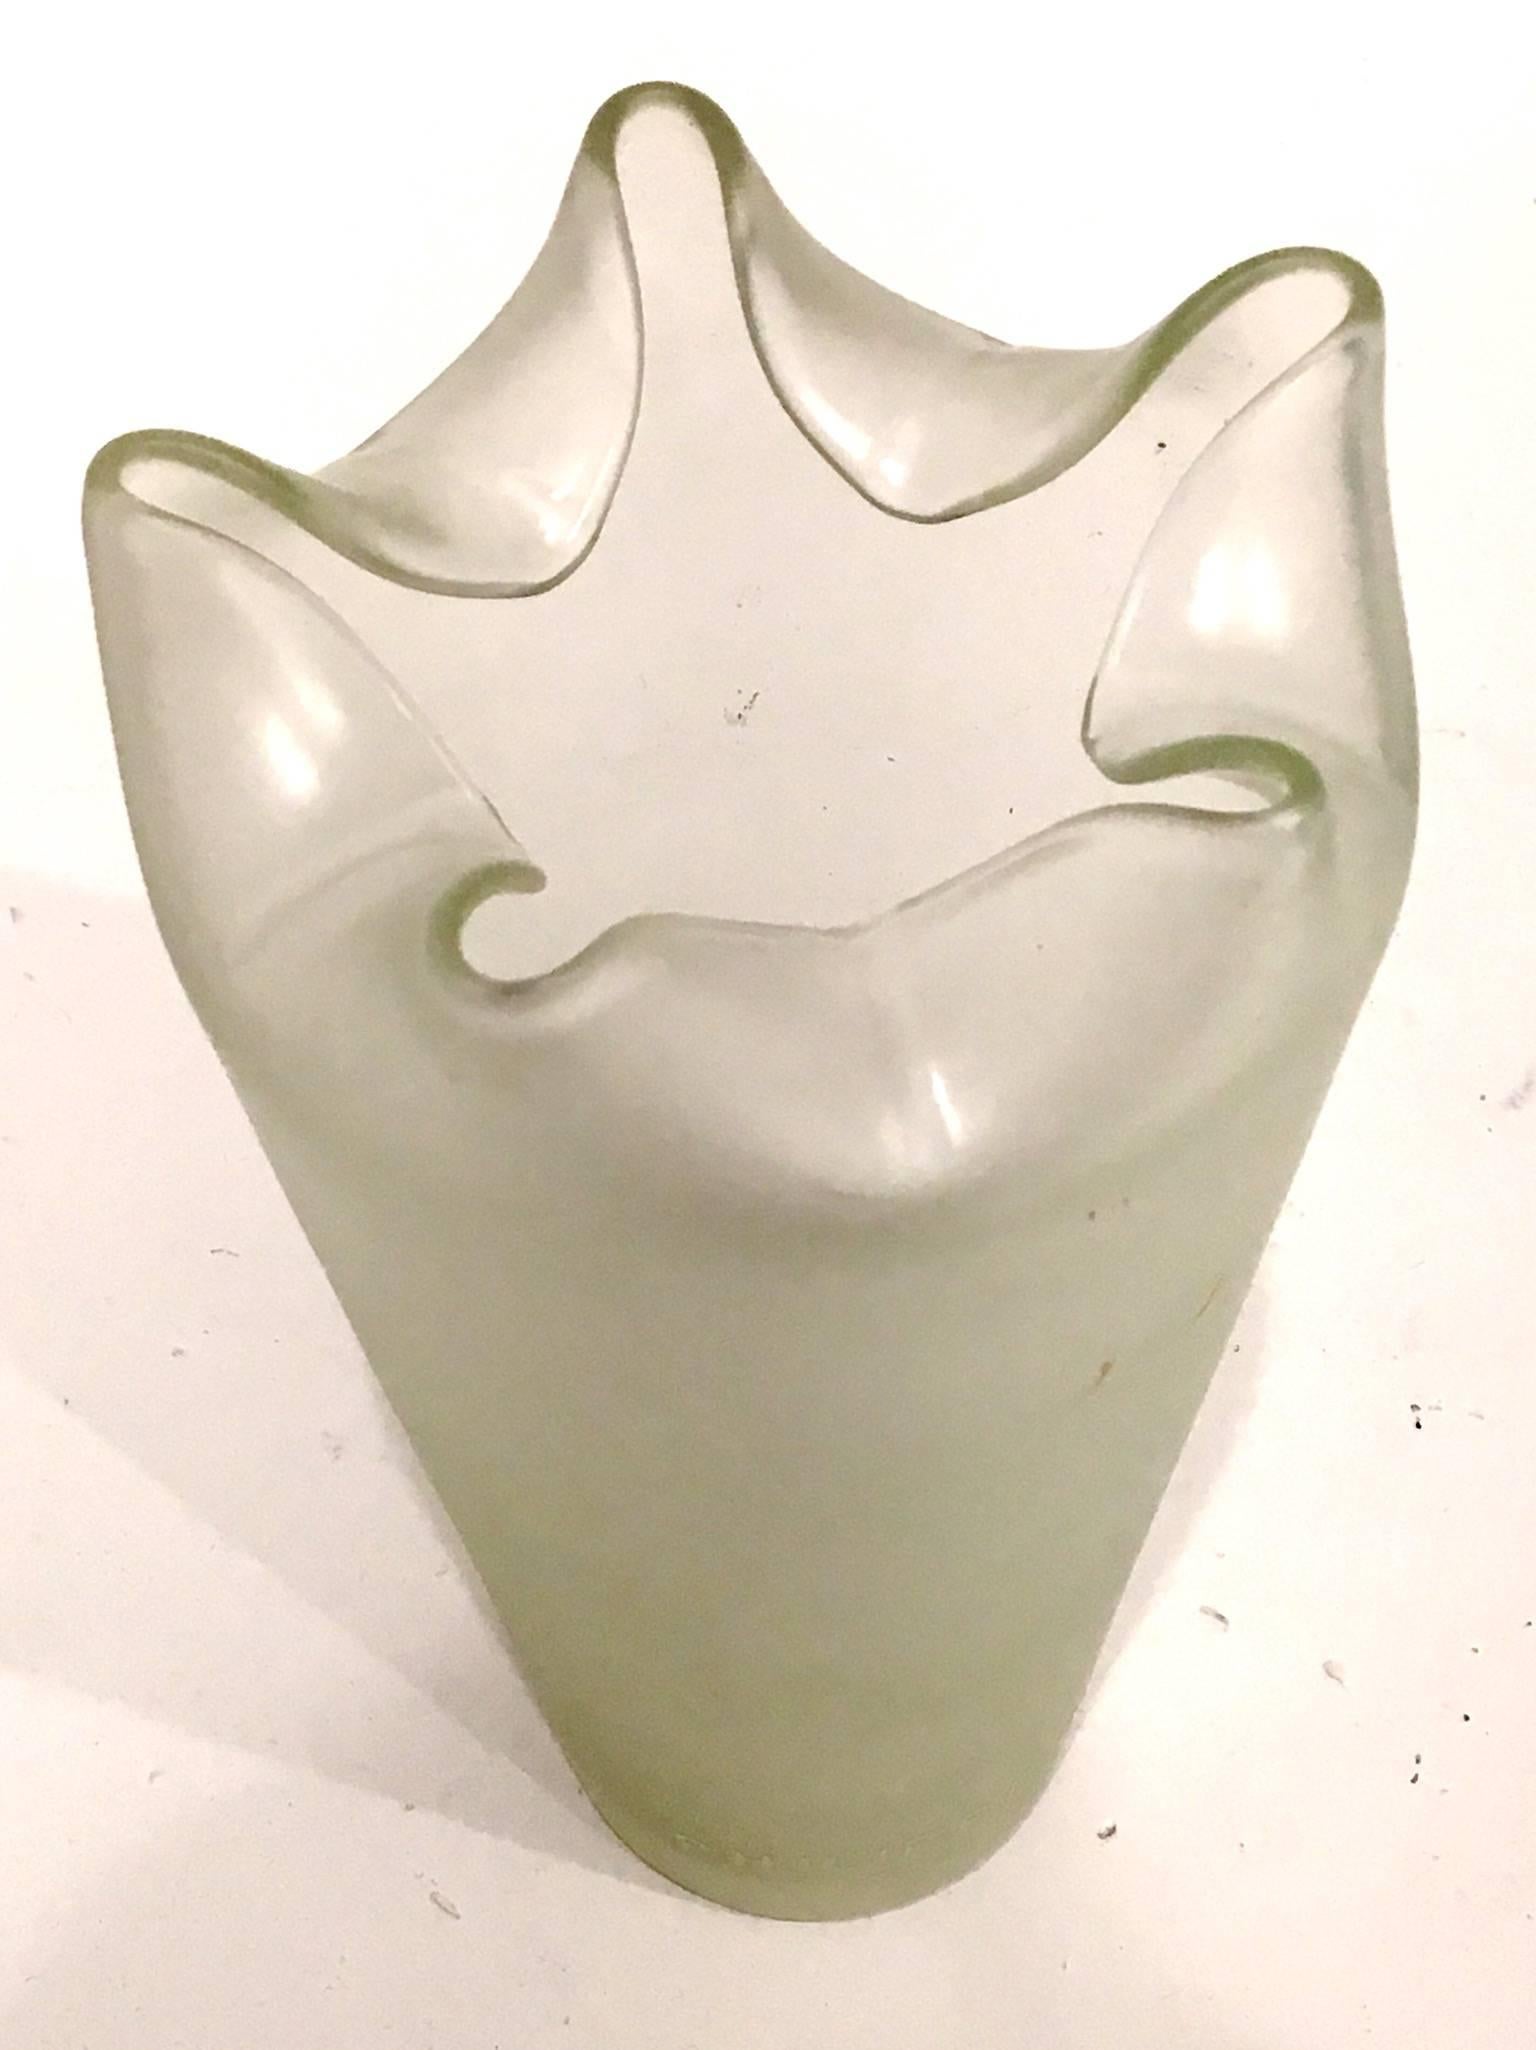 Beautiful frosted glass vase by Philippe Donay for Ligne Roset, circa 1990s great condition no chips or cracks.